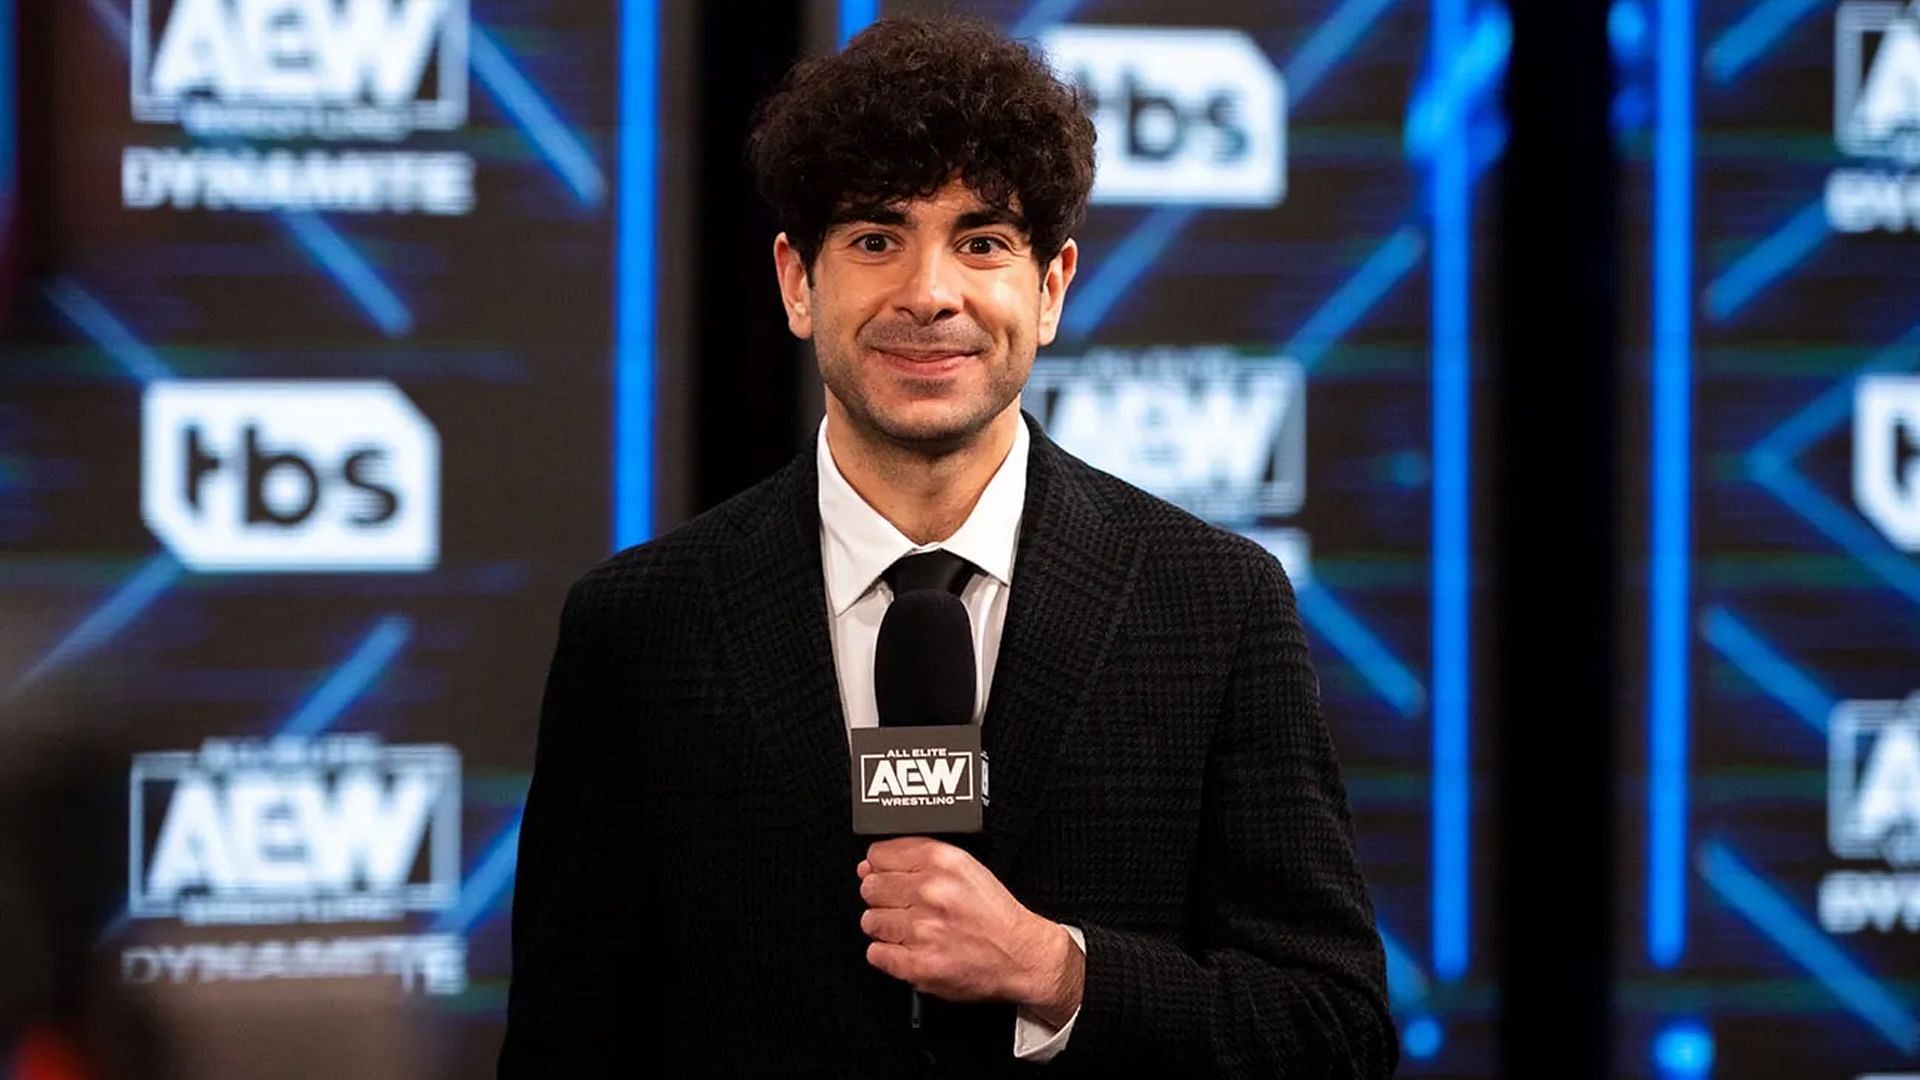 Tony Khan is the founder and president of All Elite Wrestling